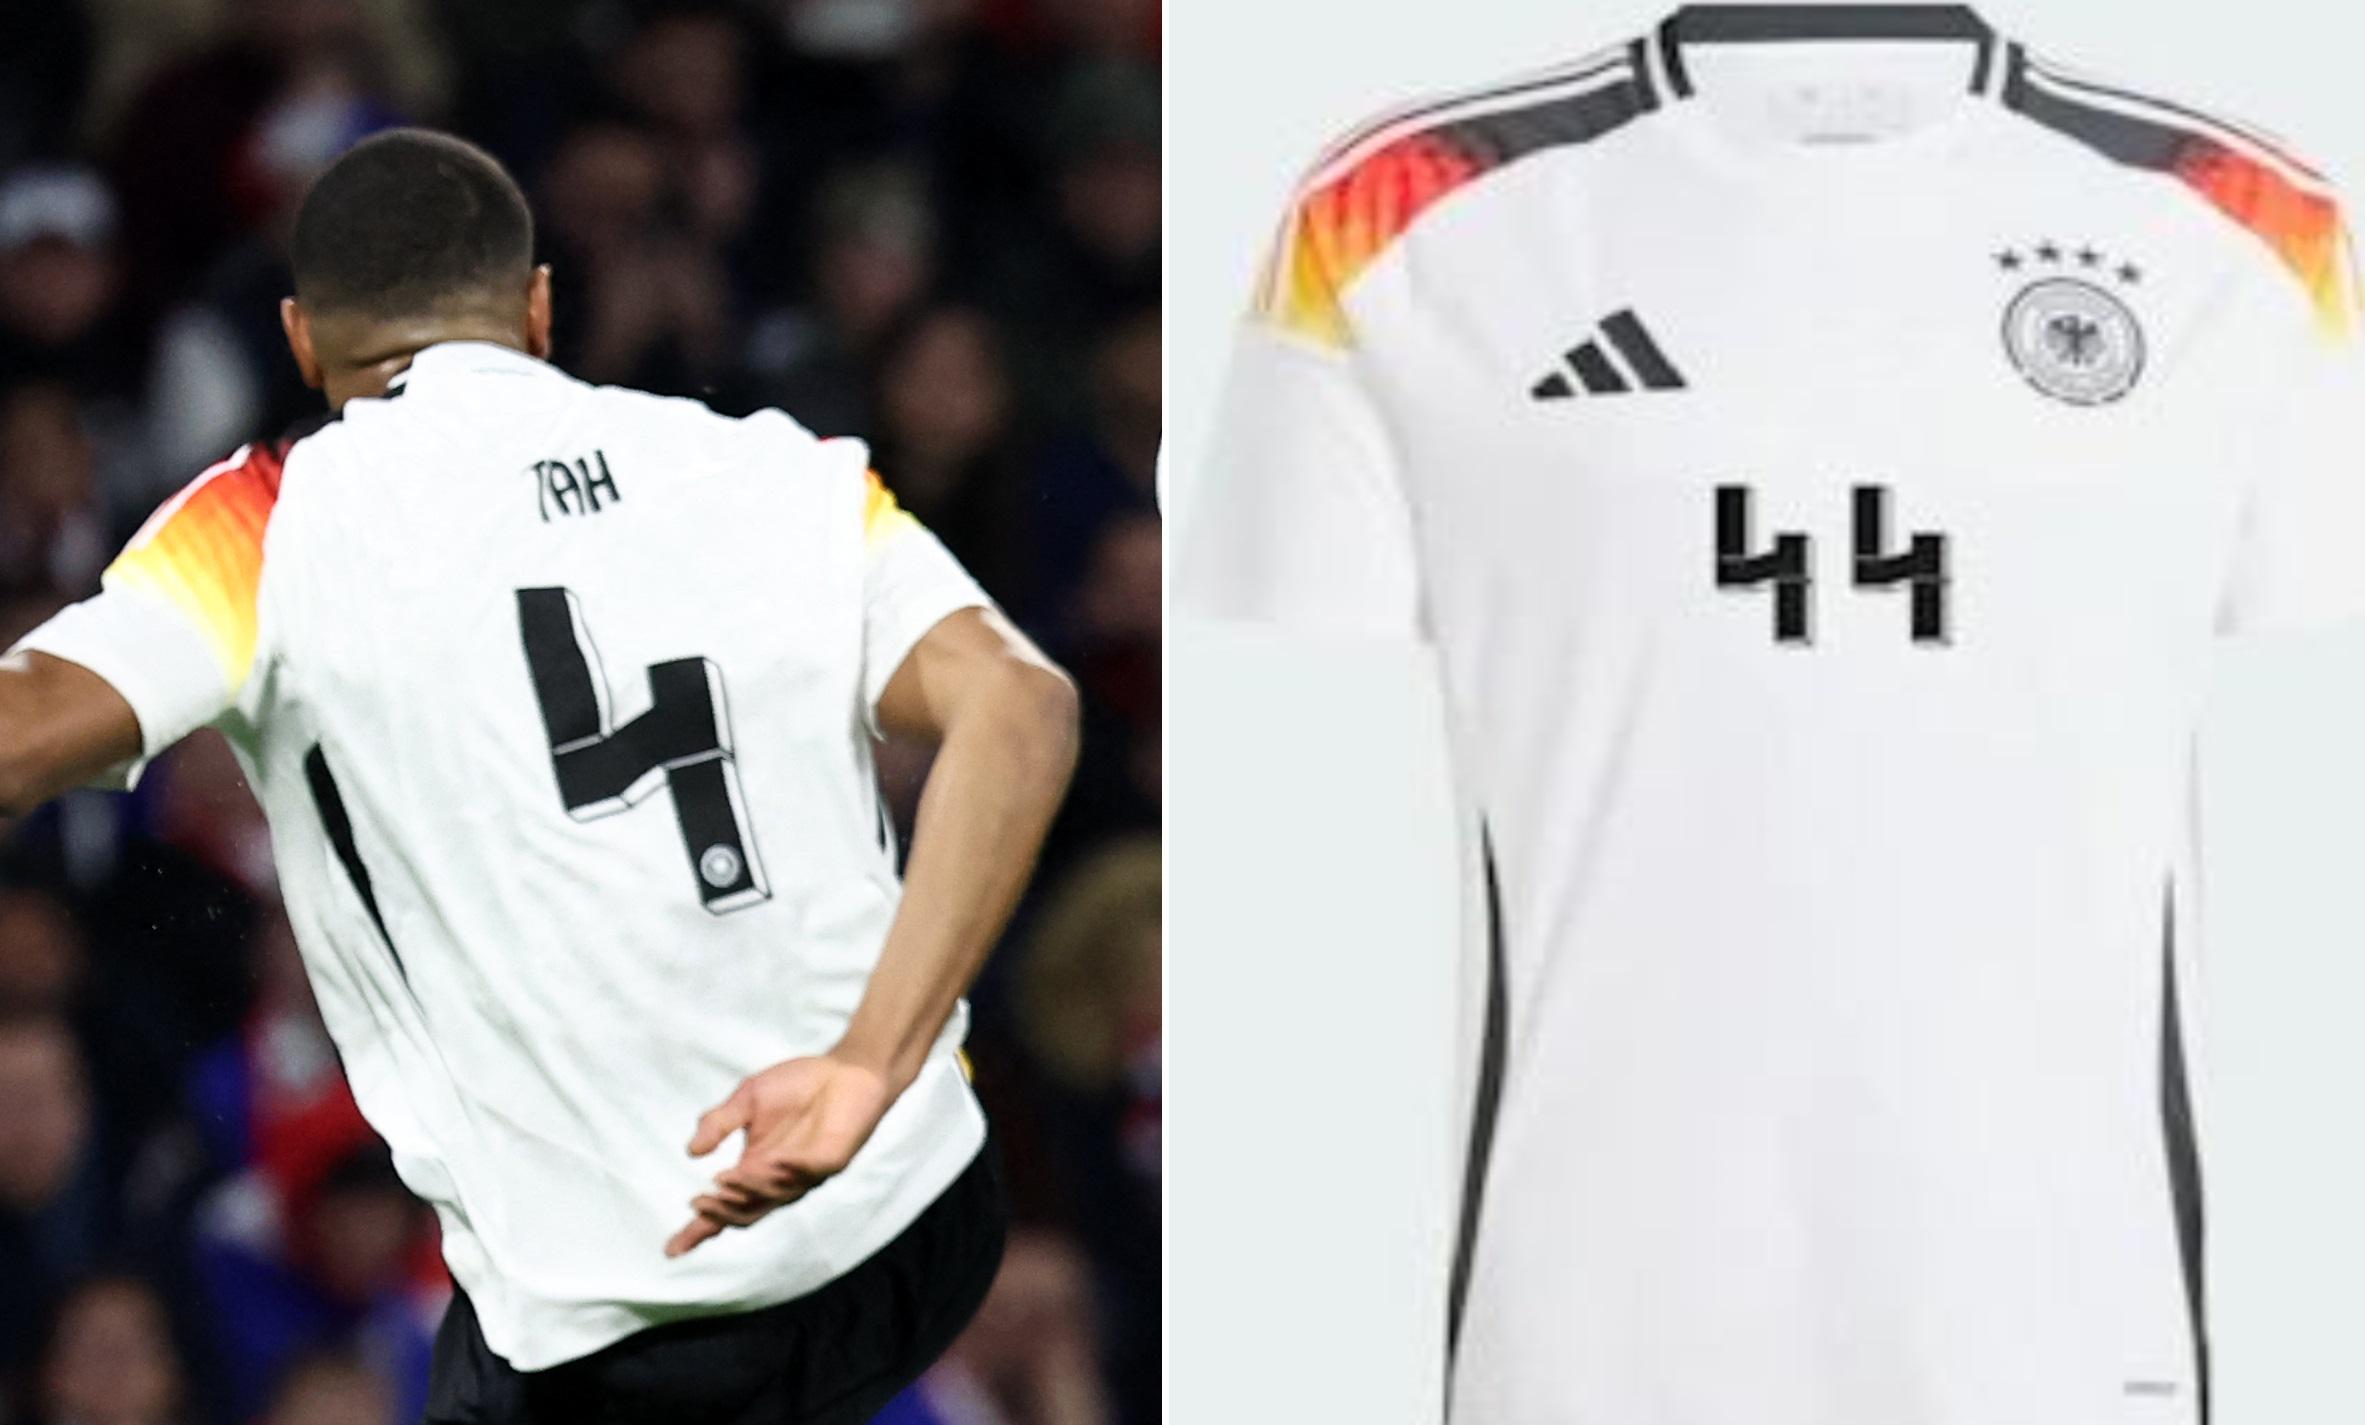 Adidas Blocks Number 44 Shirt in Germany Due to Nazi SS Connotations